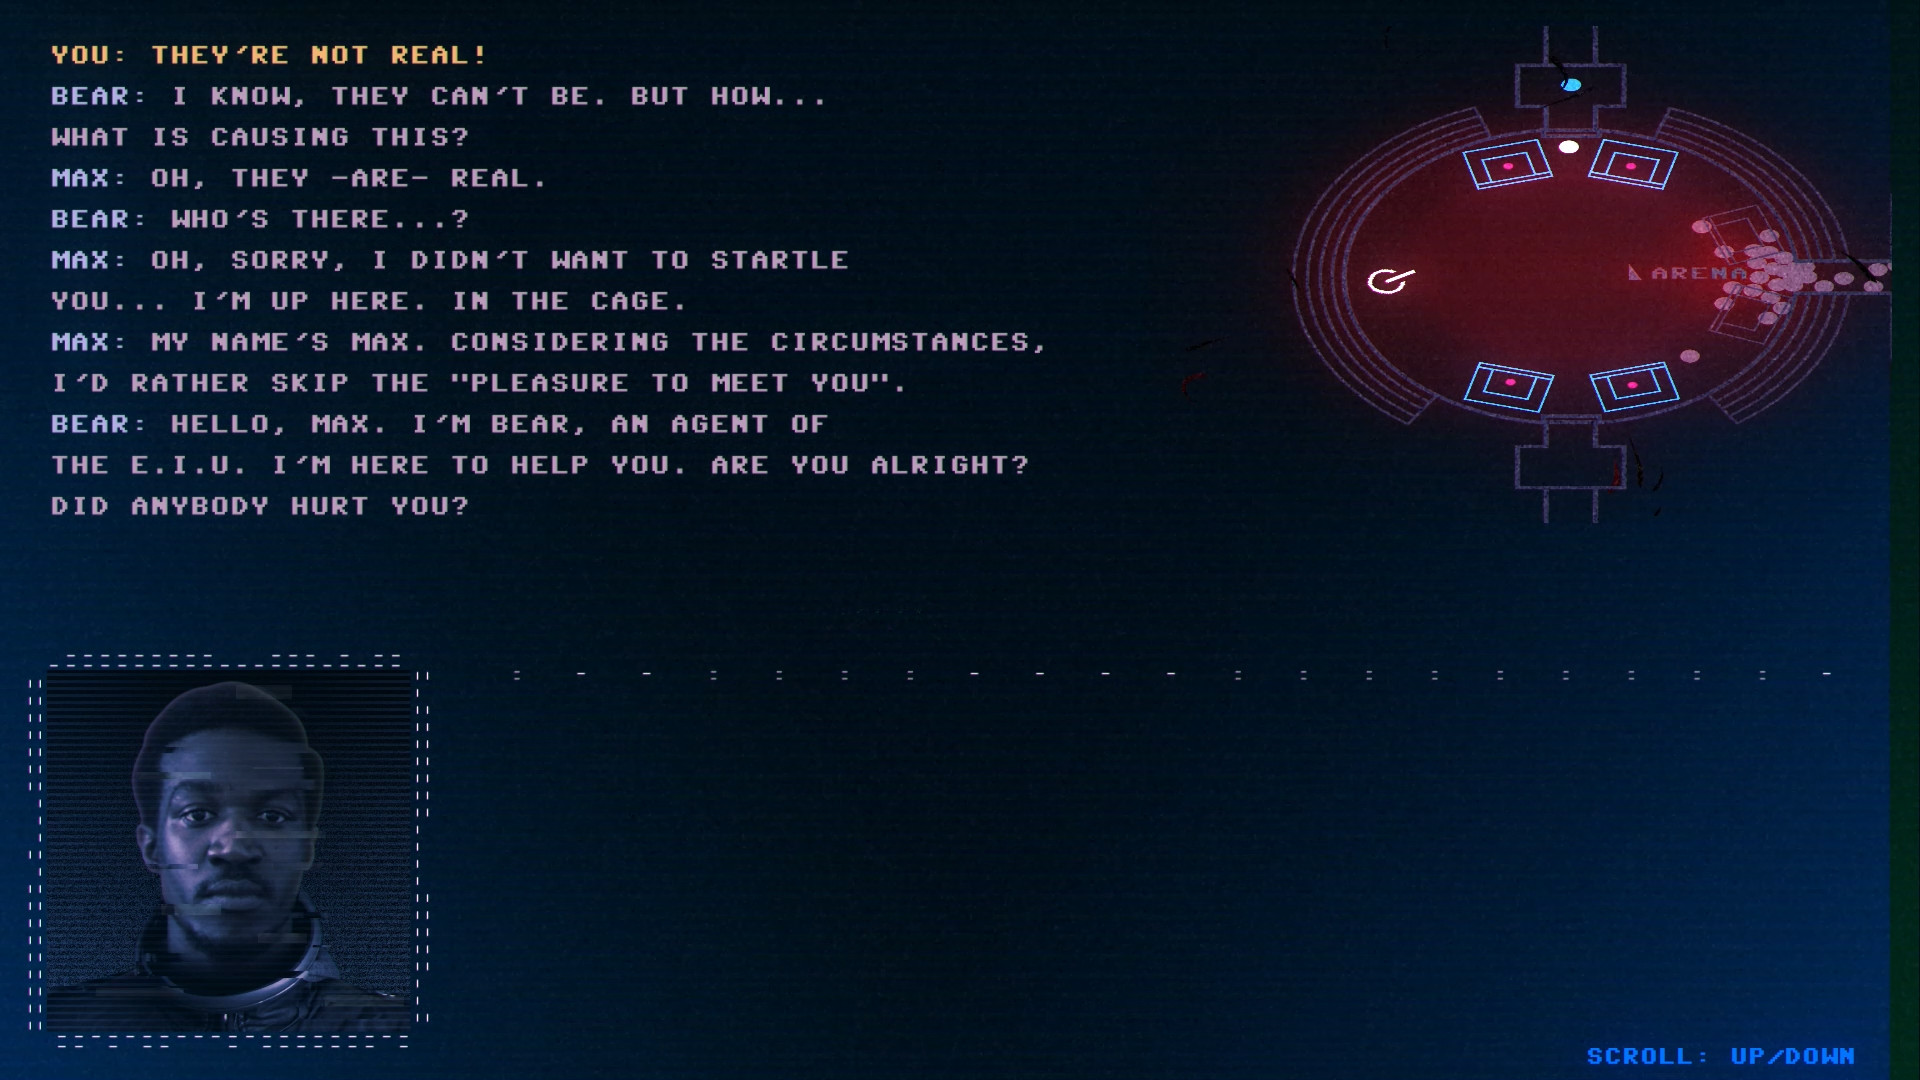 Code 7: A Story-Driven Hacking Adventure